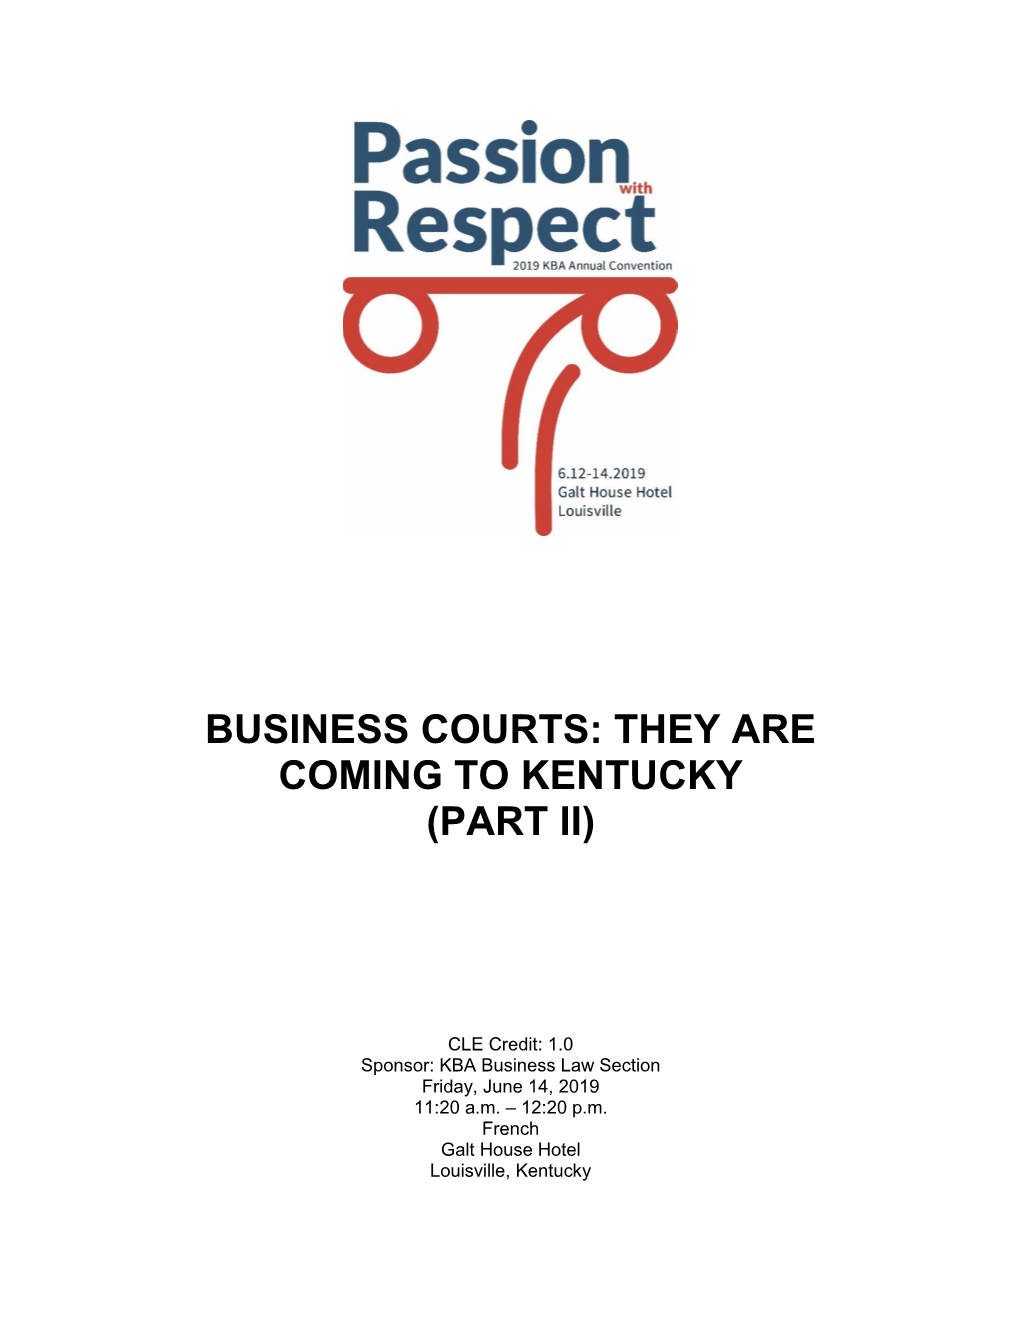 Business Courts: They Are Coming to Kentucky (Part Ii)